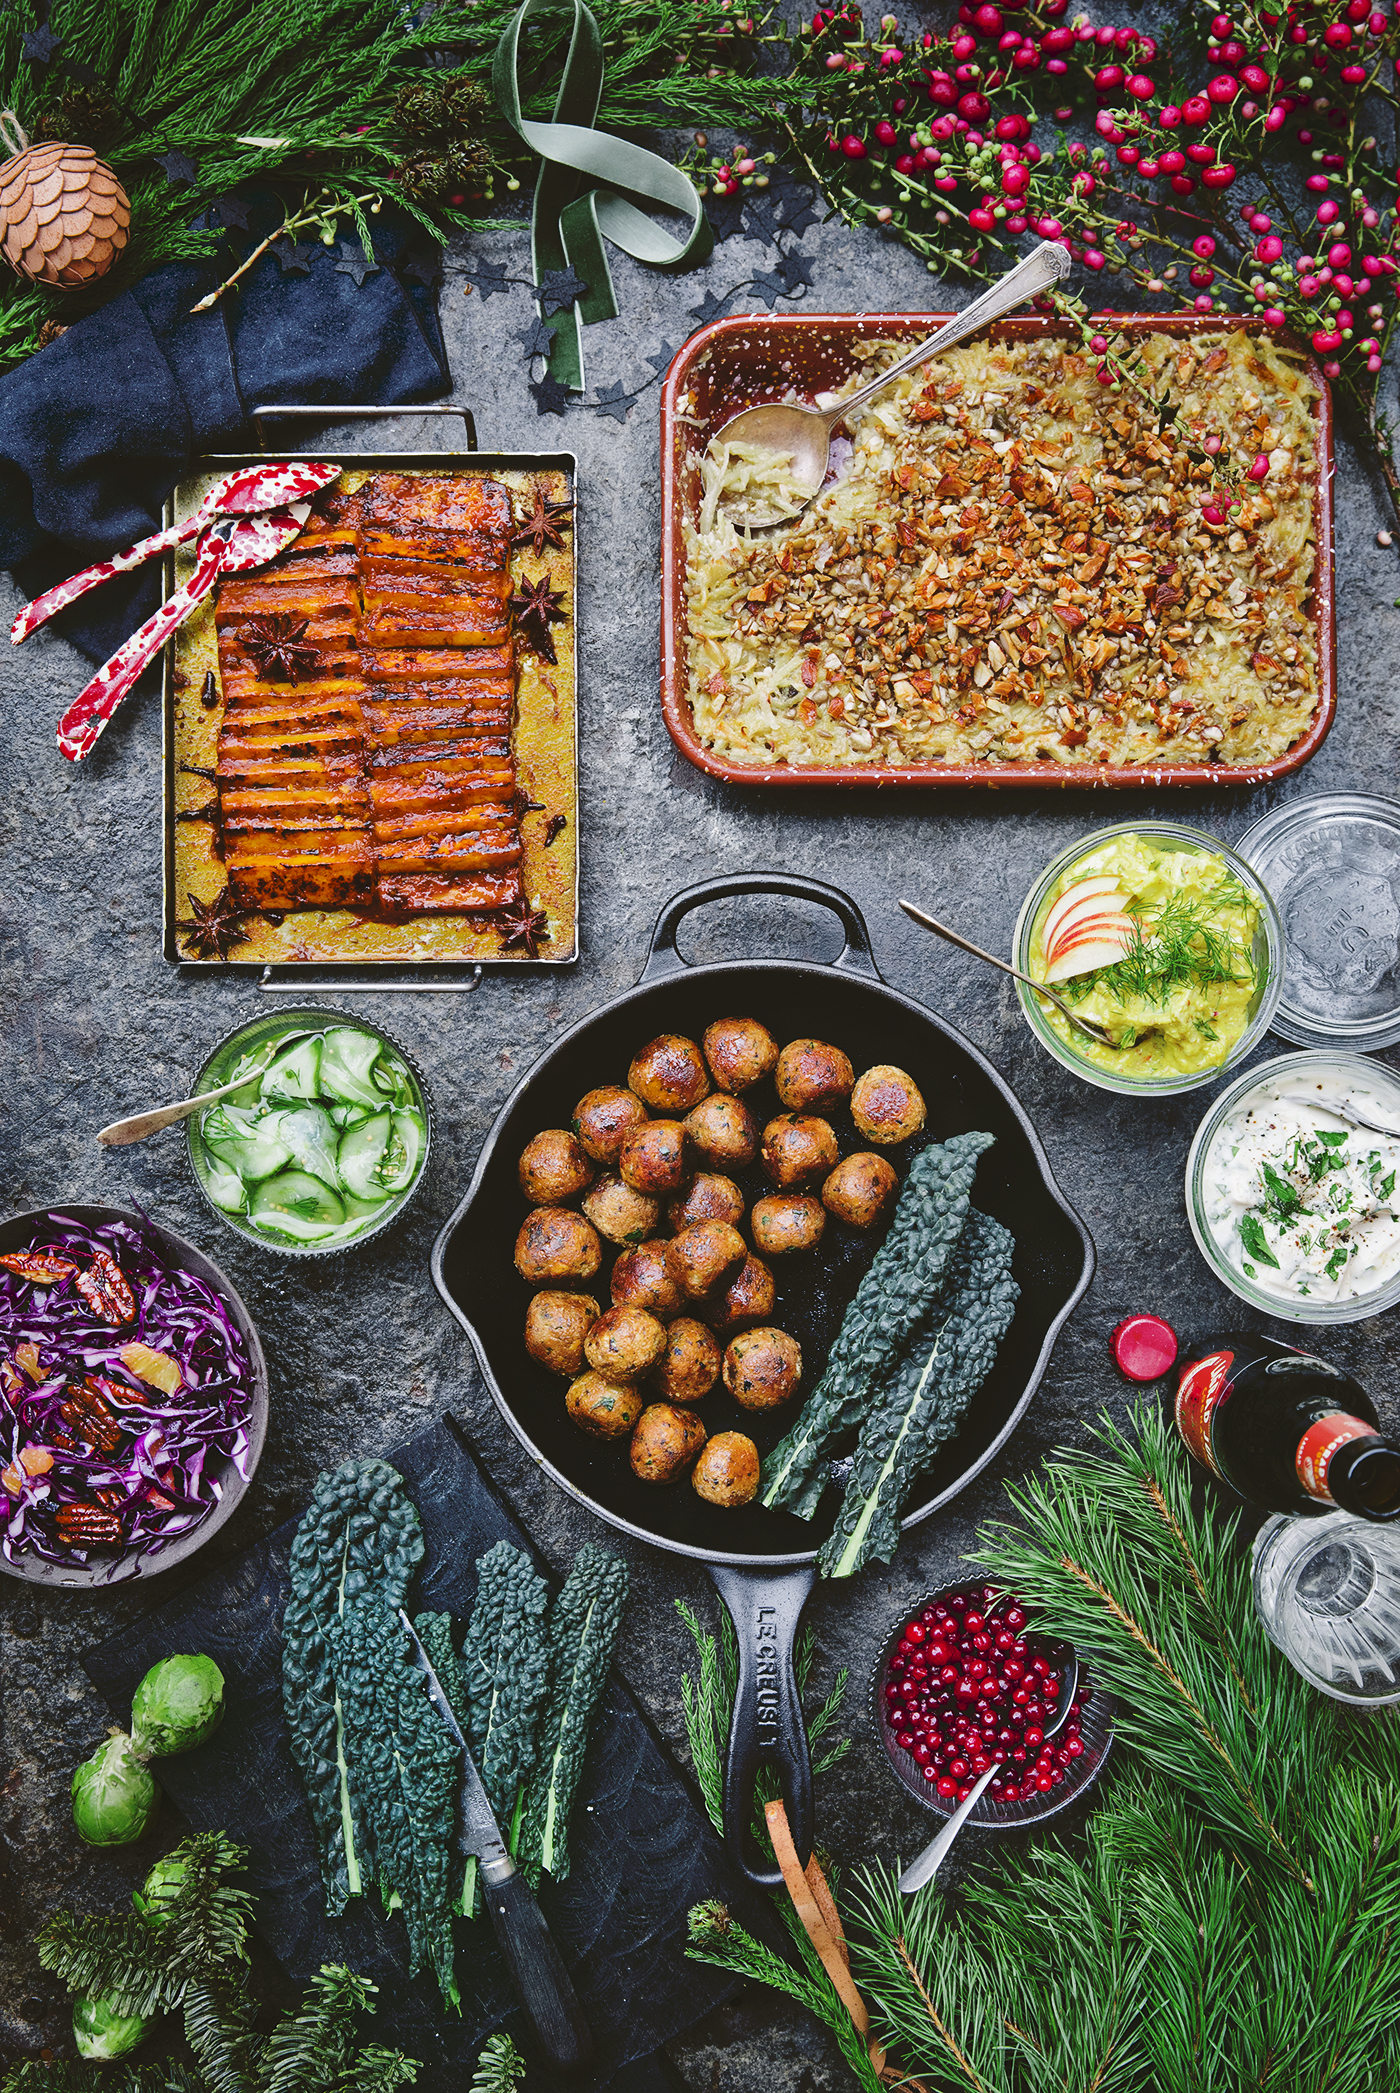 NORDIC CHRISTMAS FOOD • The Antidote Kitchen